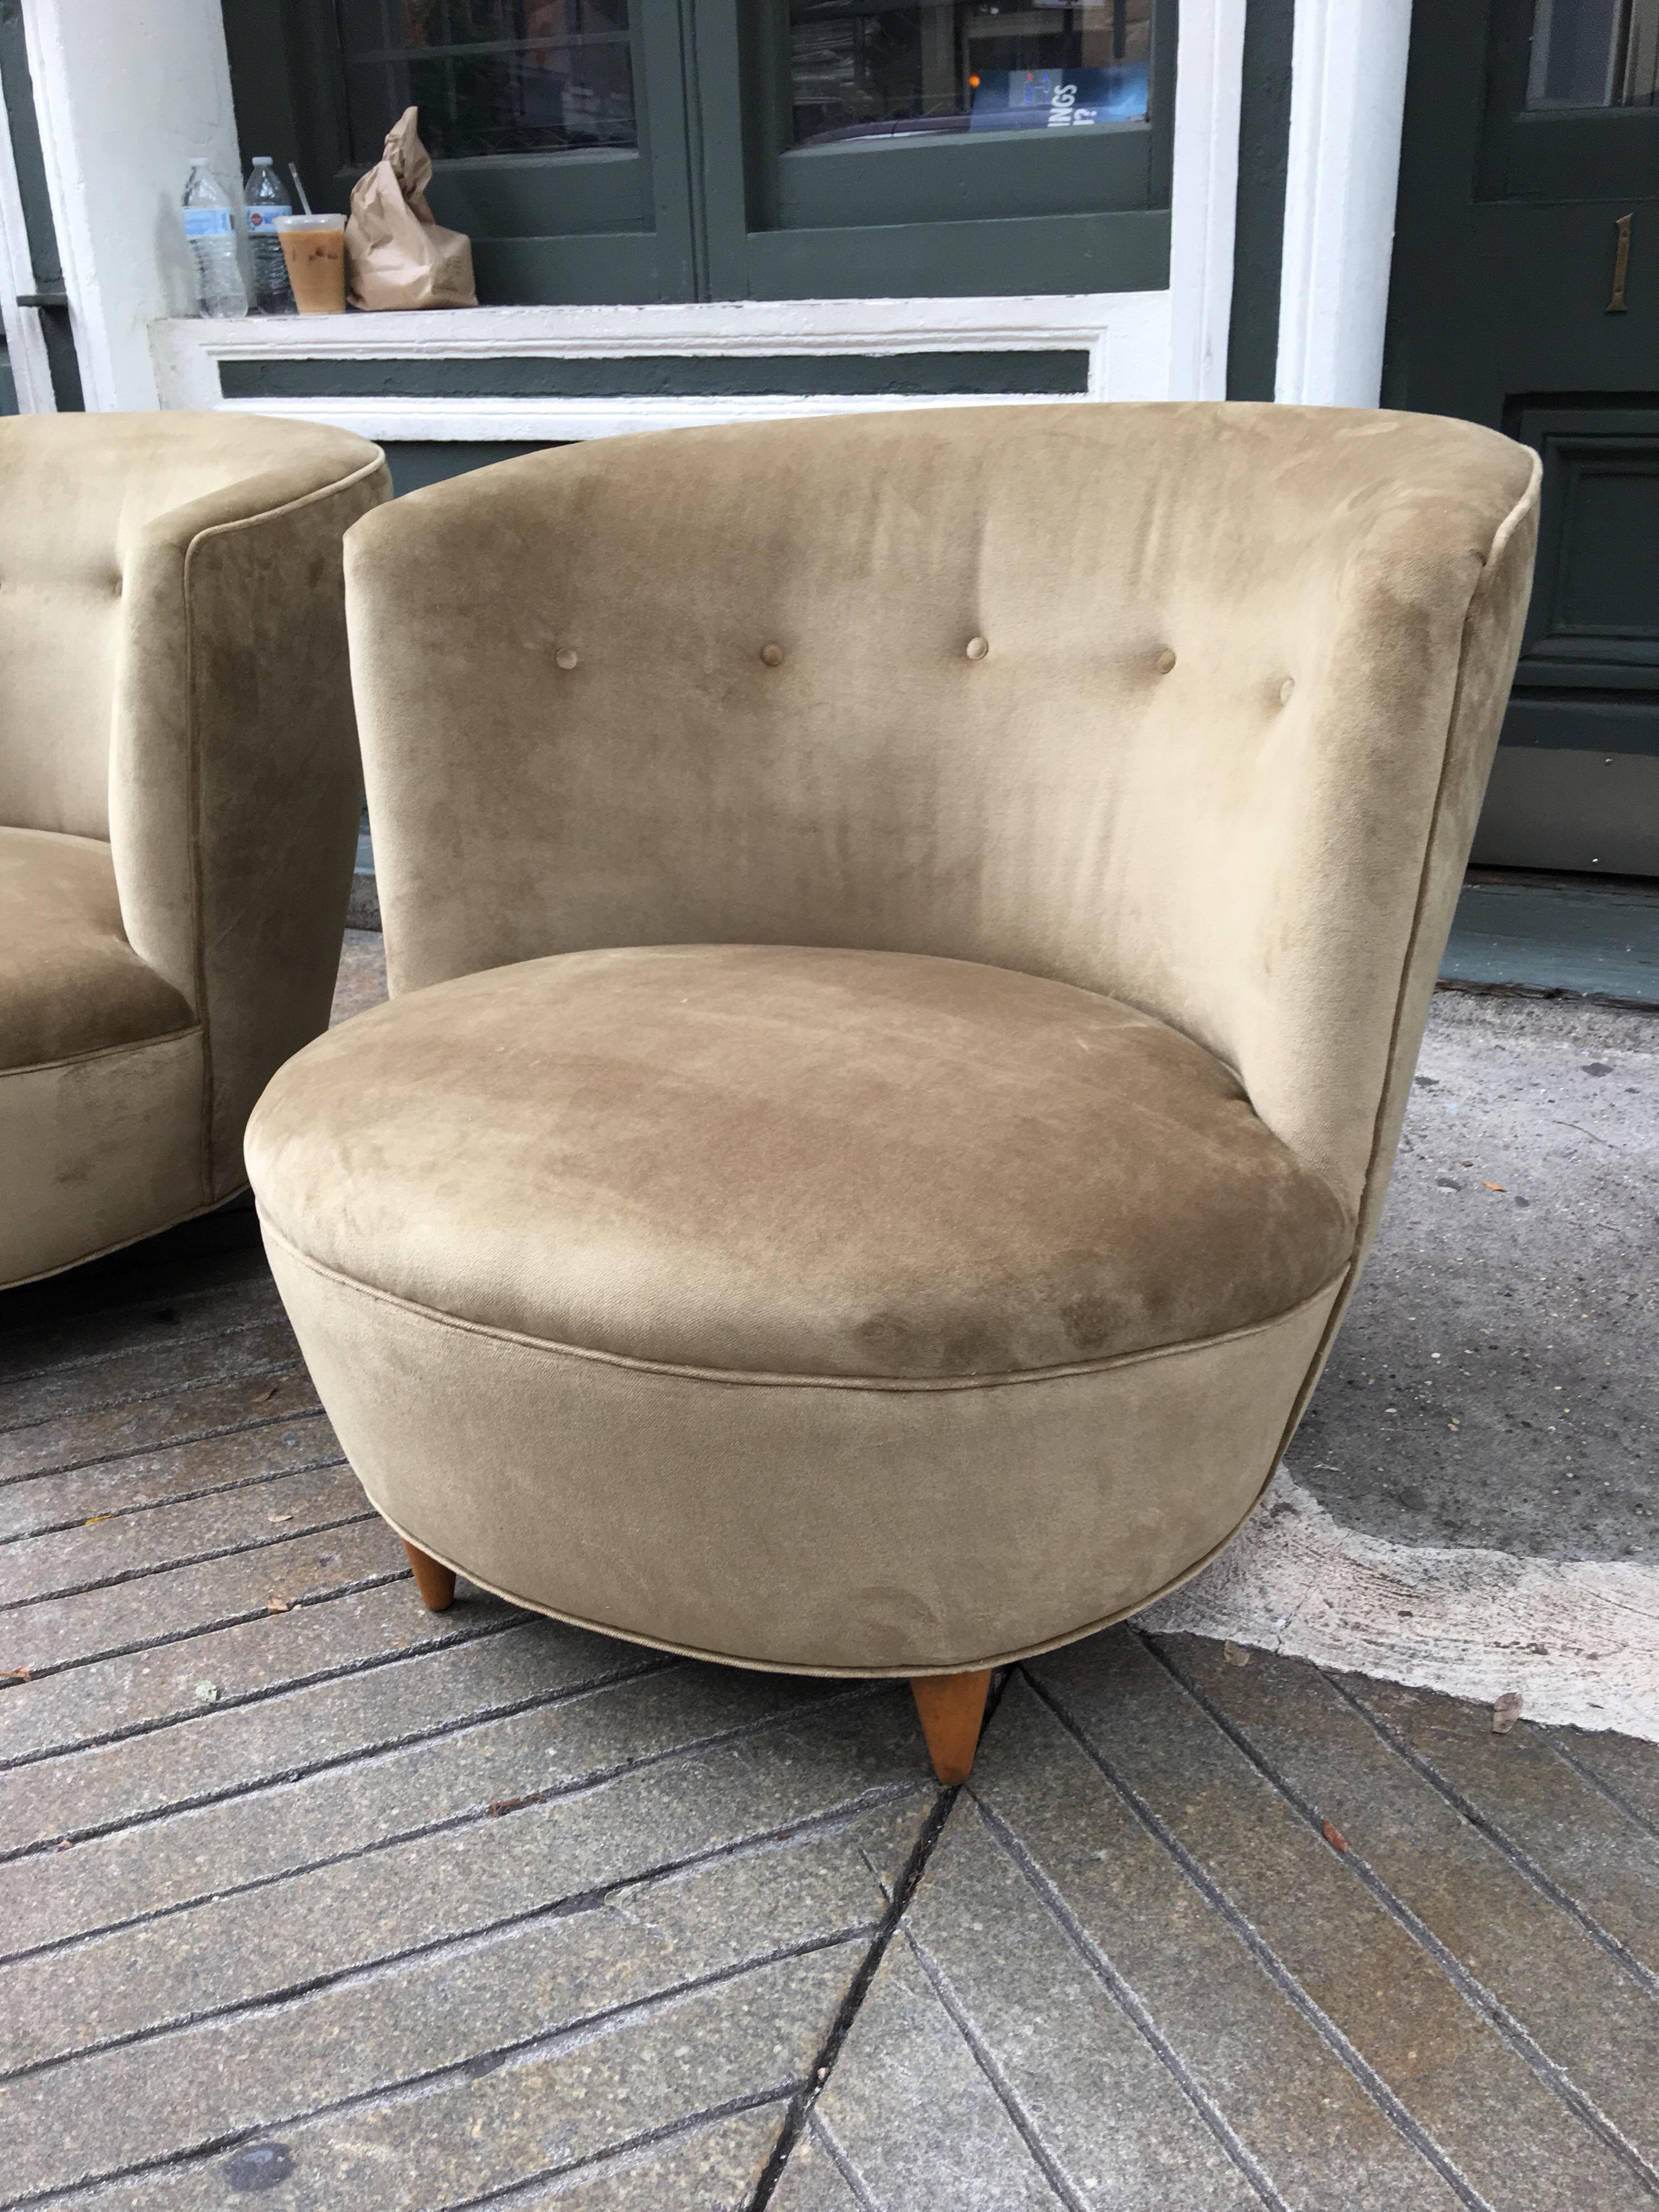 Barrel chairs in the styles of Billy Haines with maple legs comfortable and having a small foot print perfect for small spaces. Camel colored velvet fabric is new .